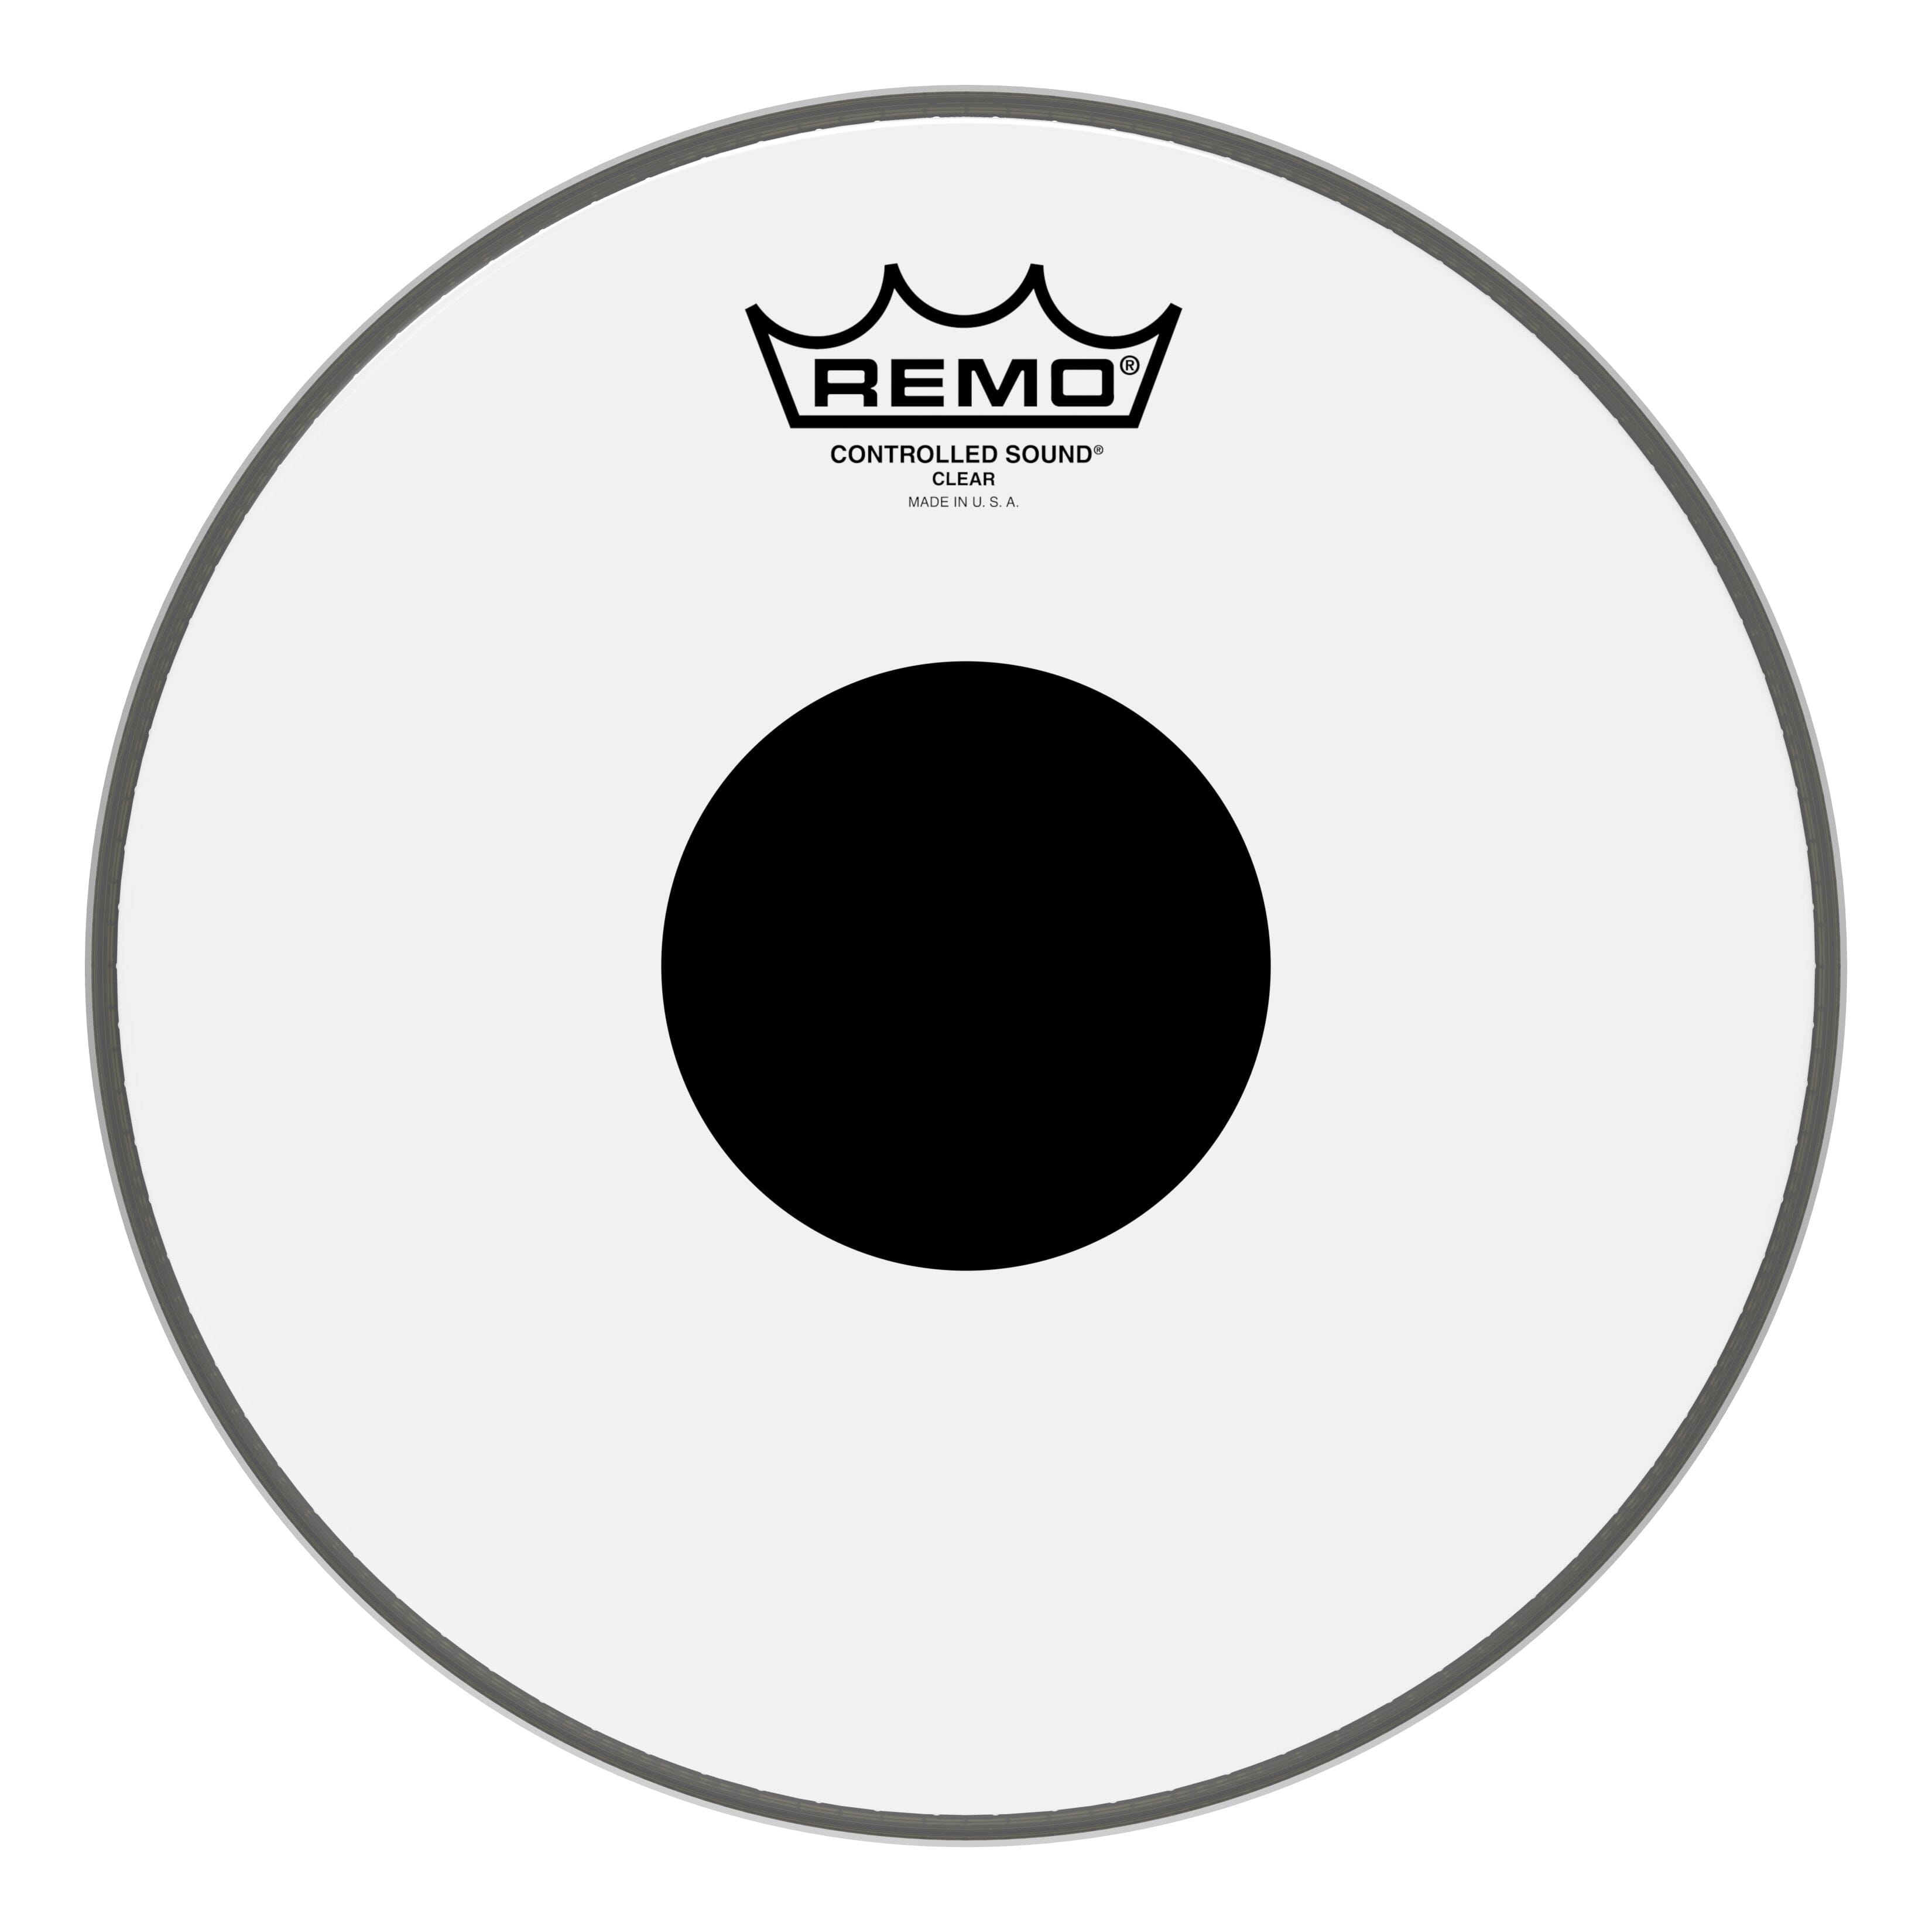 Remo 6" Controlled Sound Clear Black Dot Drum Head CS-0306-10 DRUM SKINS Remo 